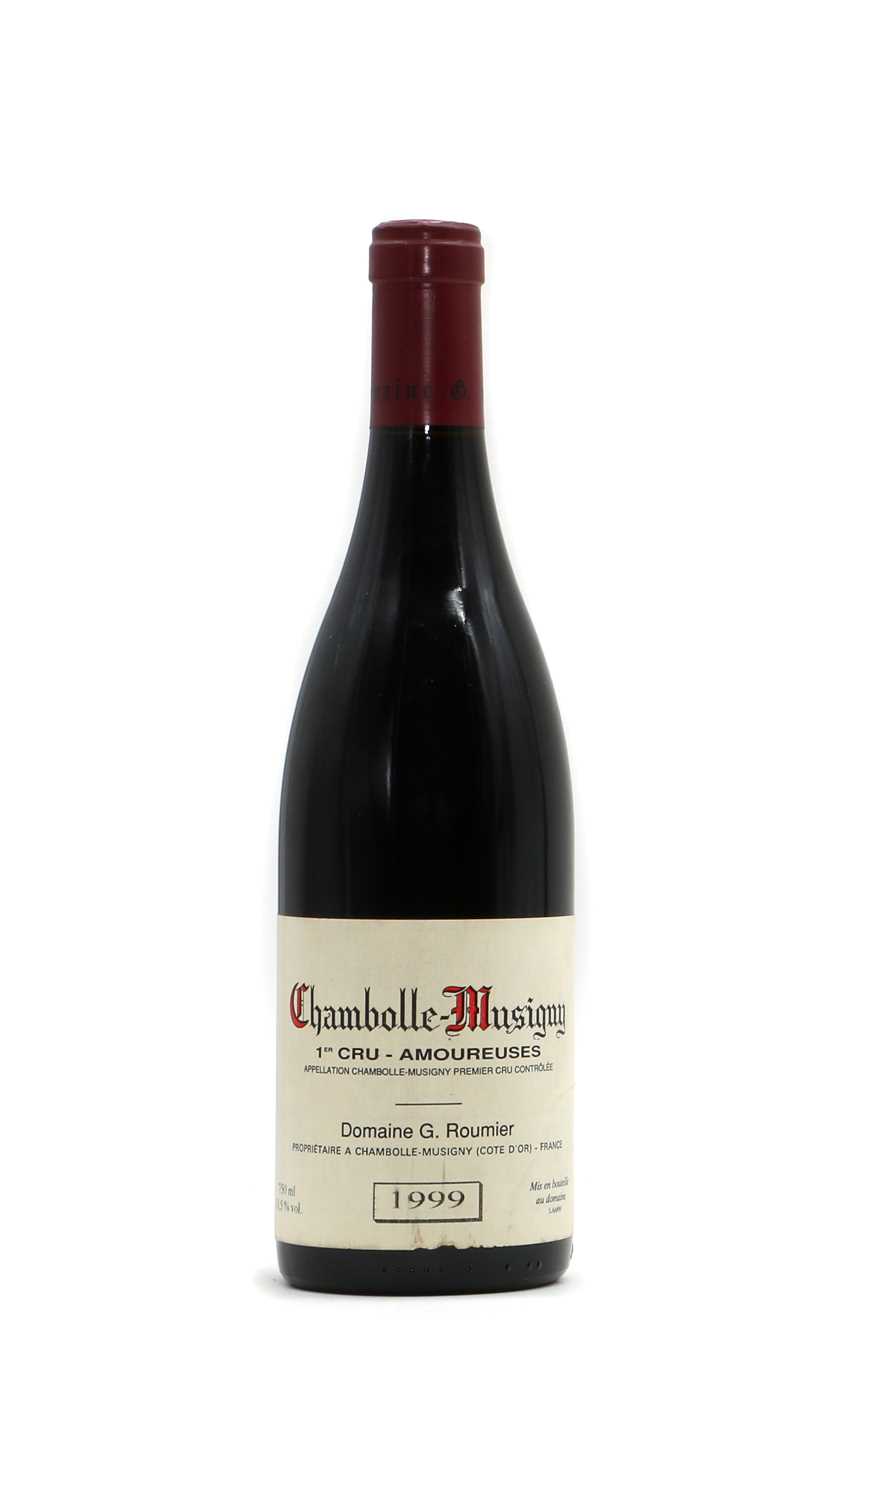 Lot 51 - Chambolle-Musigny, 1er Cru, Les Amoureuses, Domaine Georges Roumier, 1999 (1)